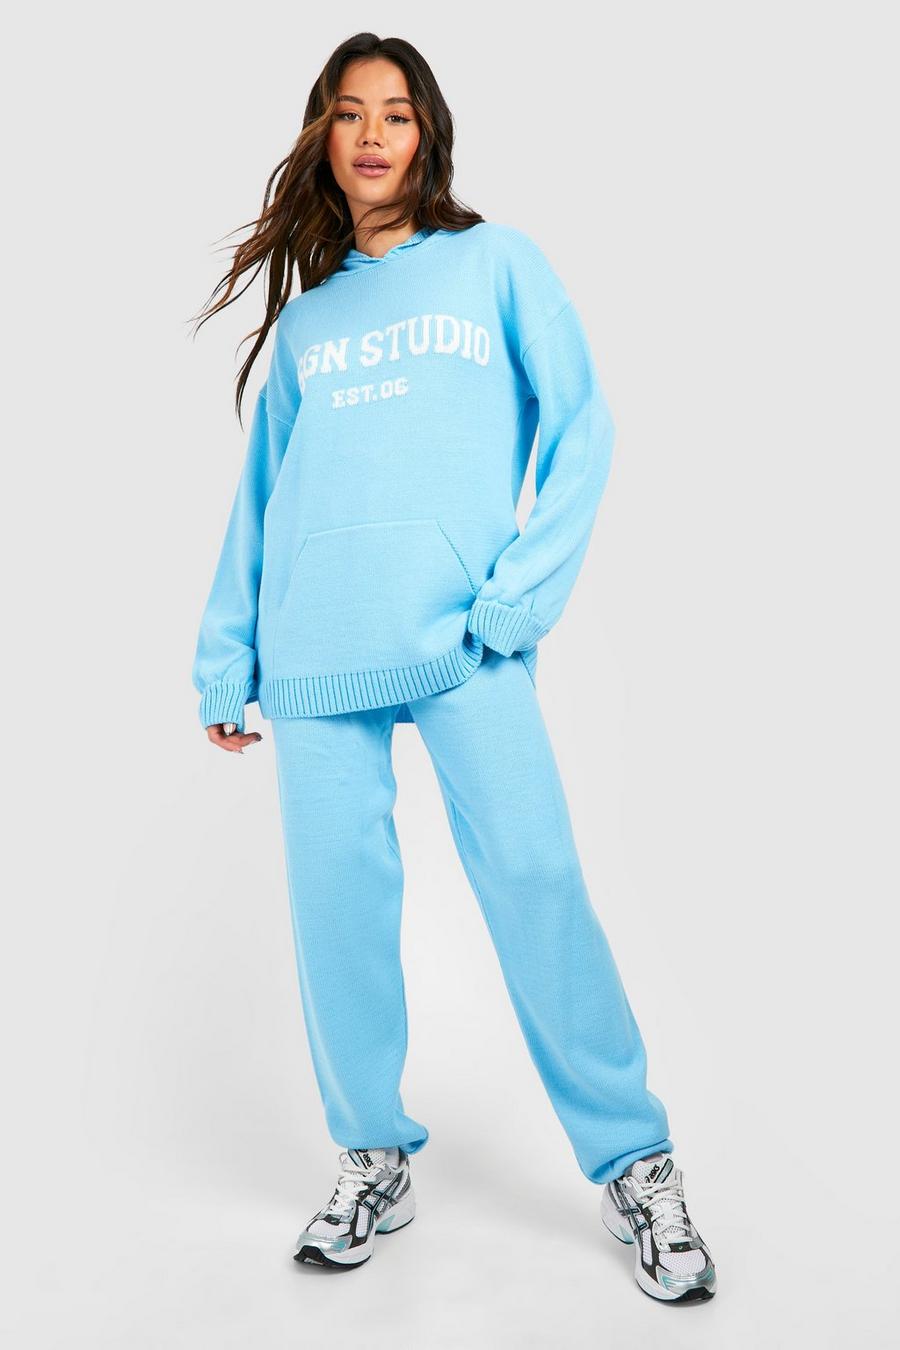 Bright blue Dsgn Studio Oversized Hoody And Jogger Set image number 1